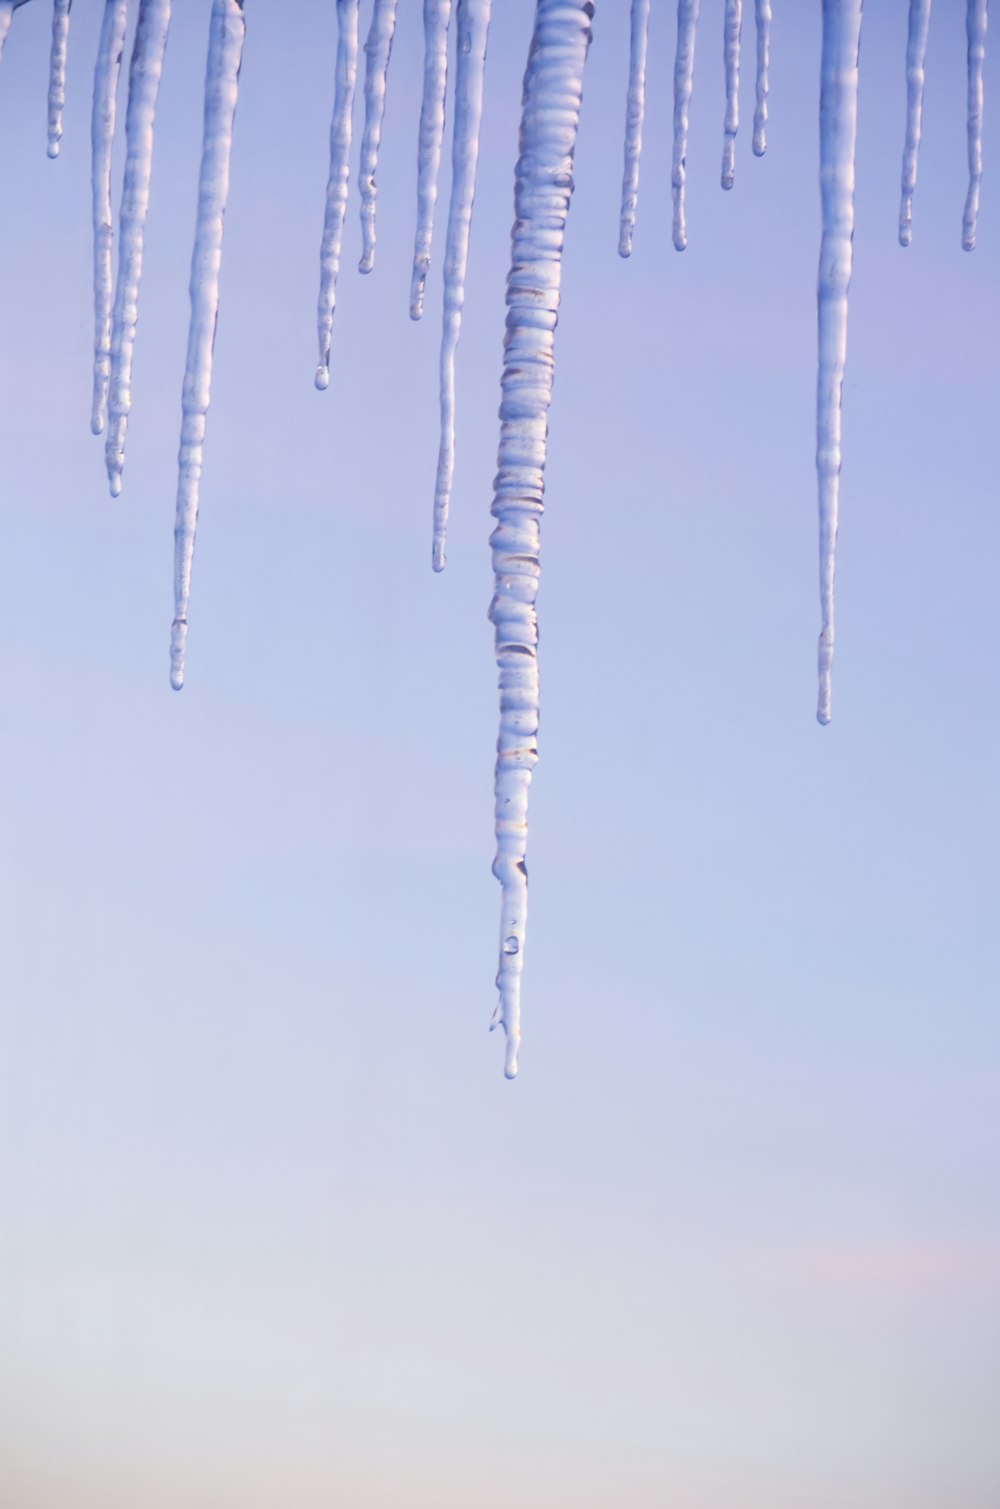 a group of icicles hanging from a blue sky